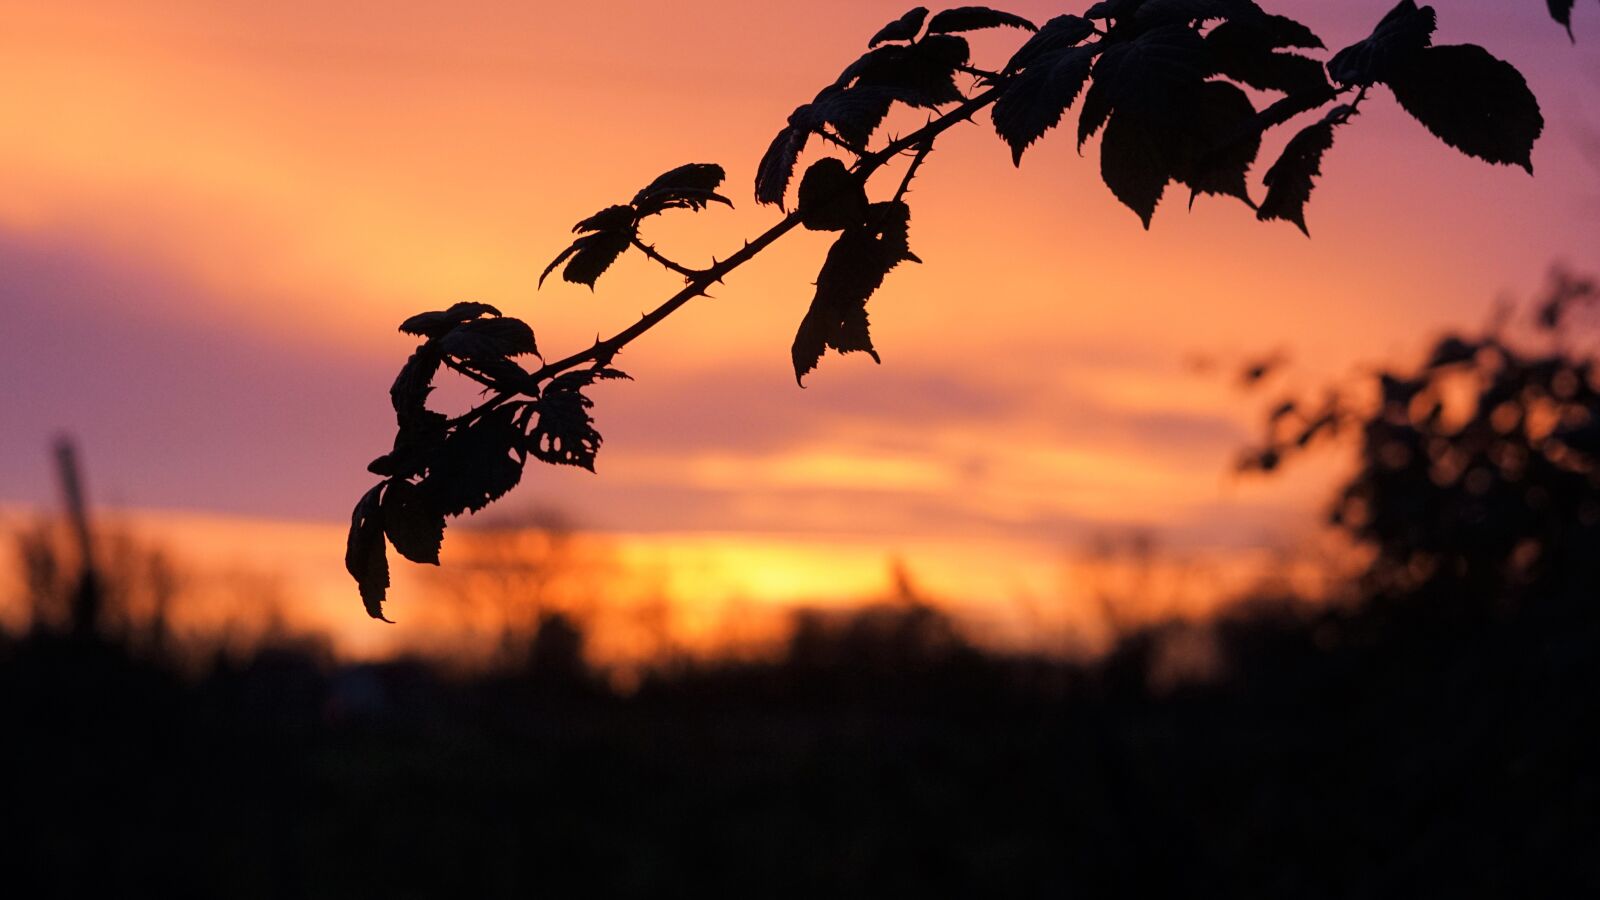 Sony a6000 sample photo. Sunrise, blackberry leaves, branch photography